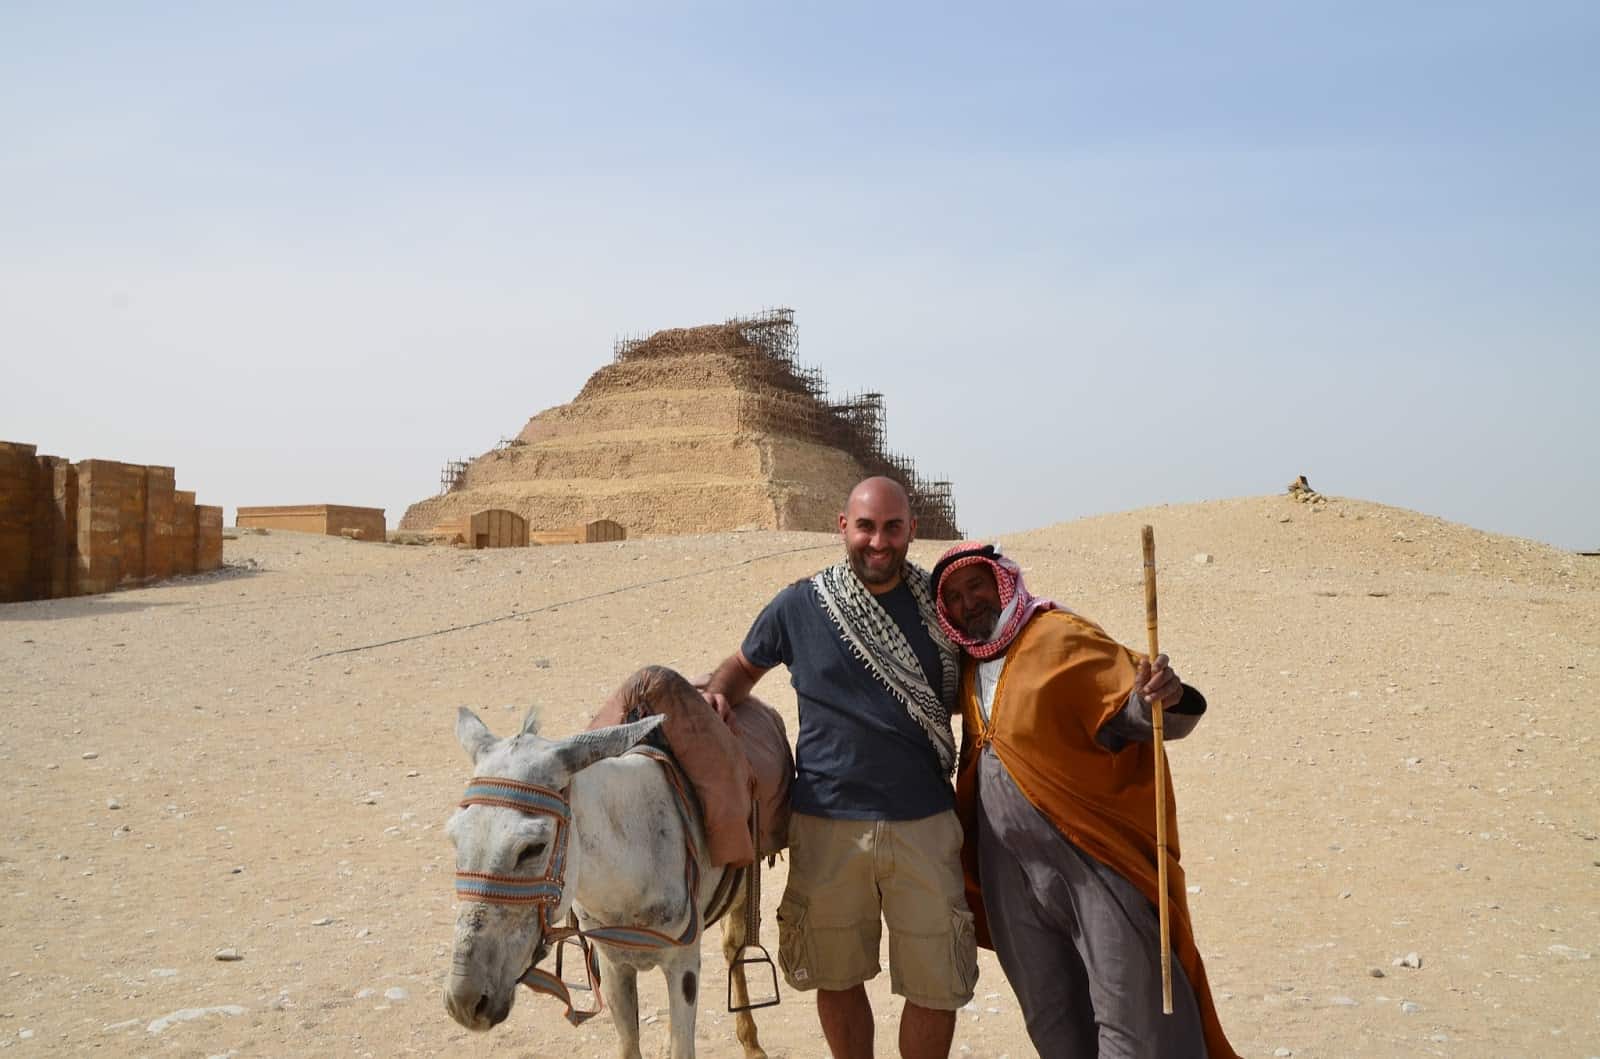 I didn’t want to take this picture at Saqqara, Egypt